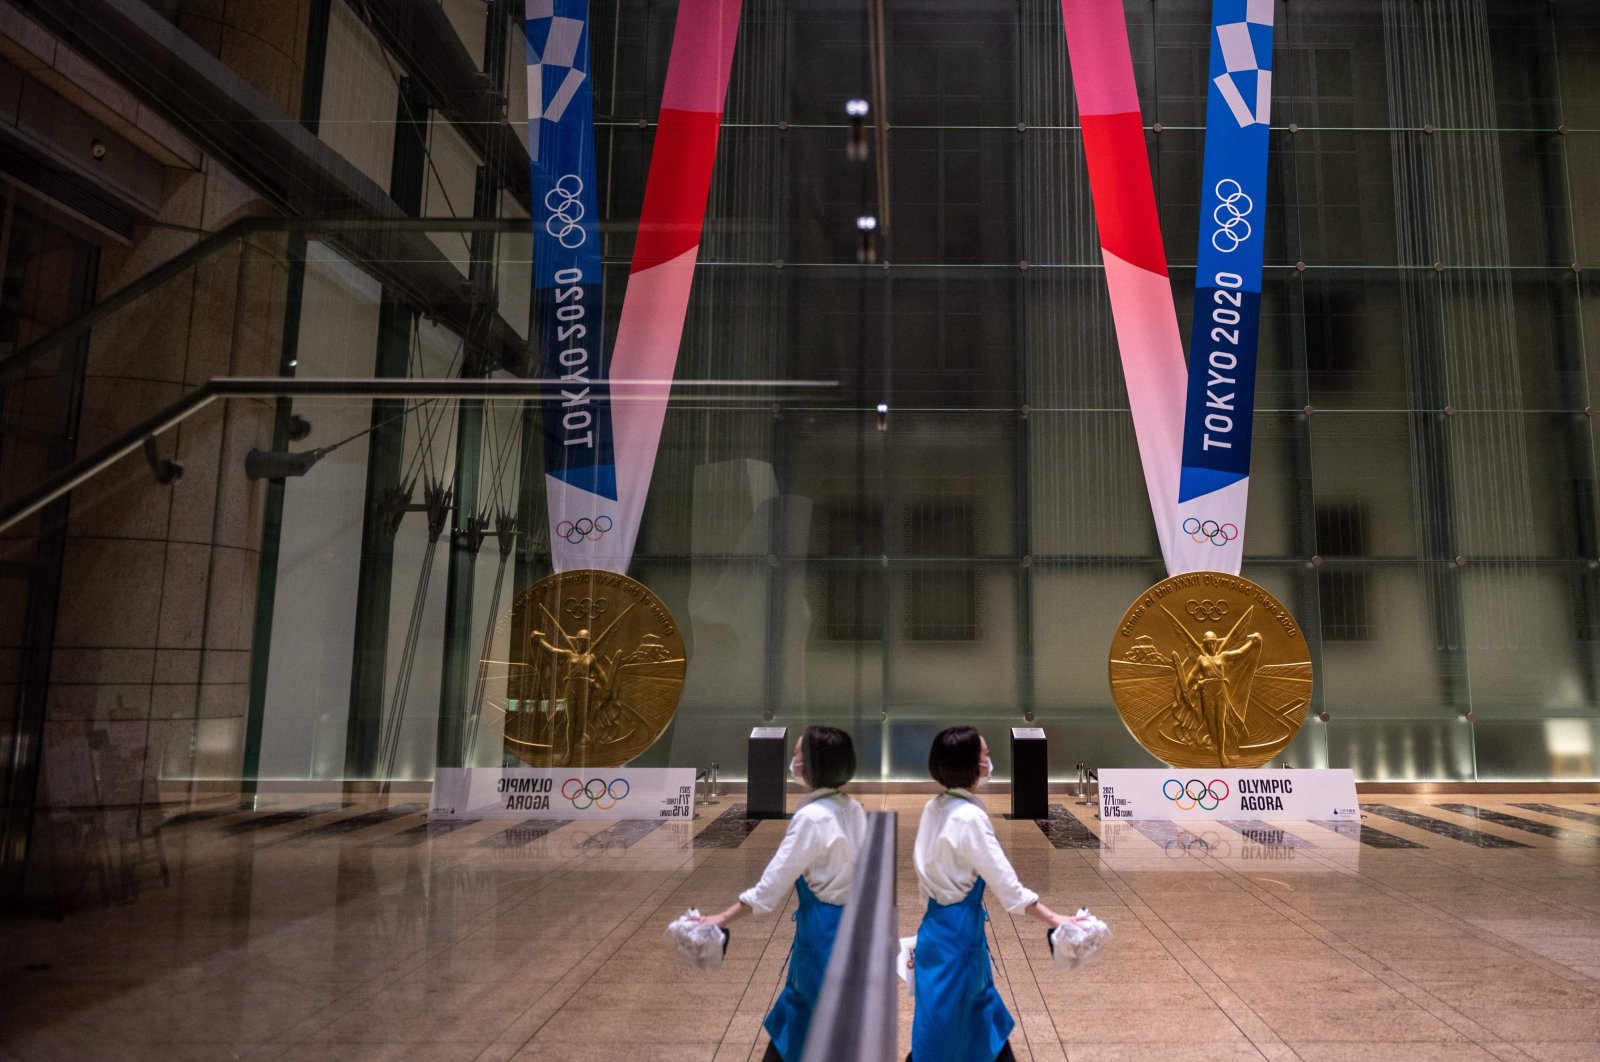 A woman walks near a large-scale reproduction of the Tokyo 2020 Olympic Games gold medal as part of the Olympic Agora event at Mitsui Tower, Tokyo, Japan, July 14, 2021. (AFP Photo)